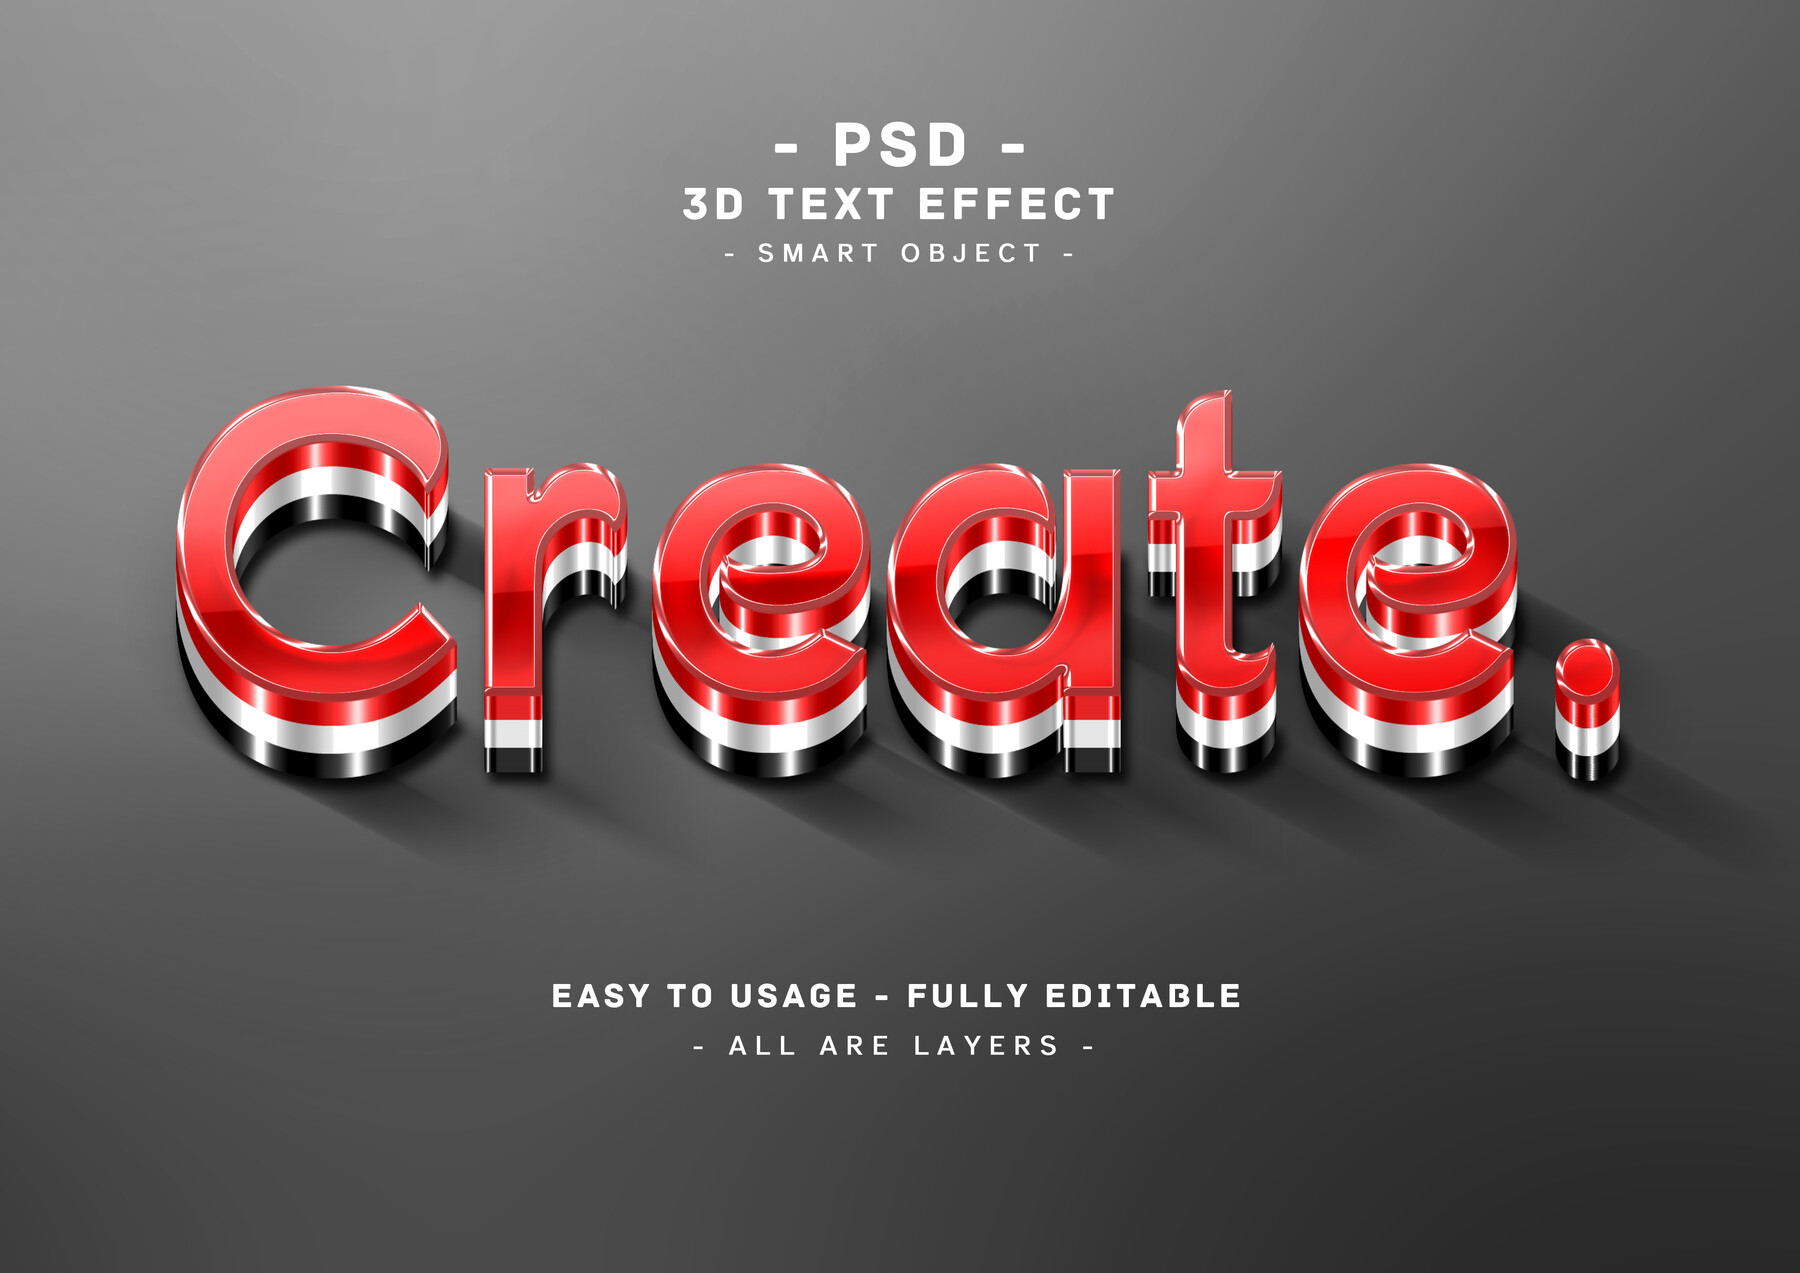 Creating a Typing Effect in Photoshop